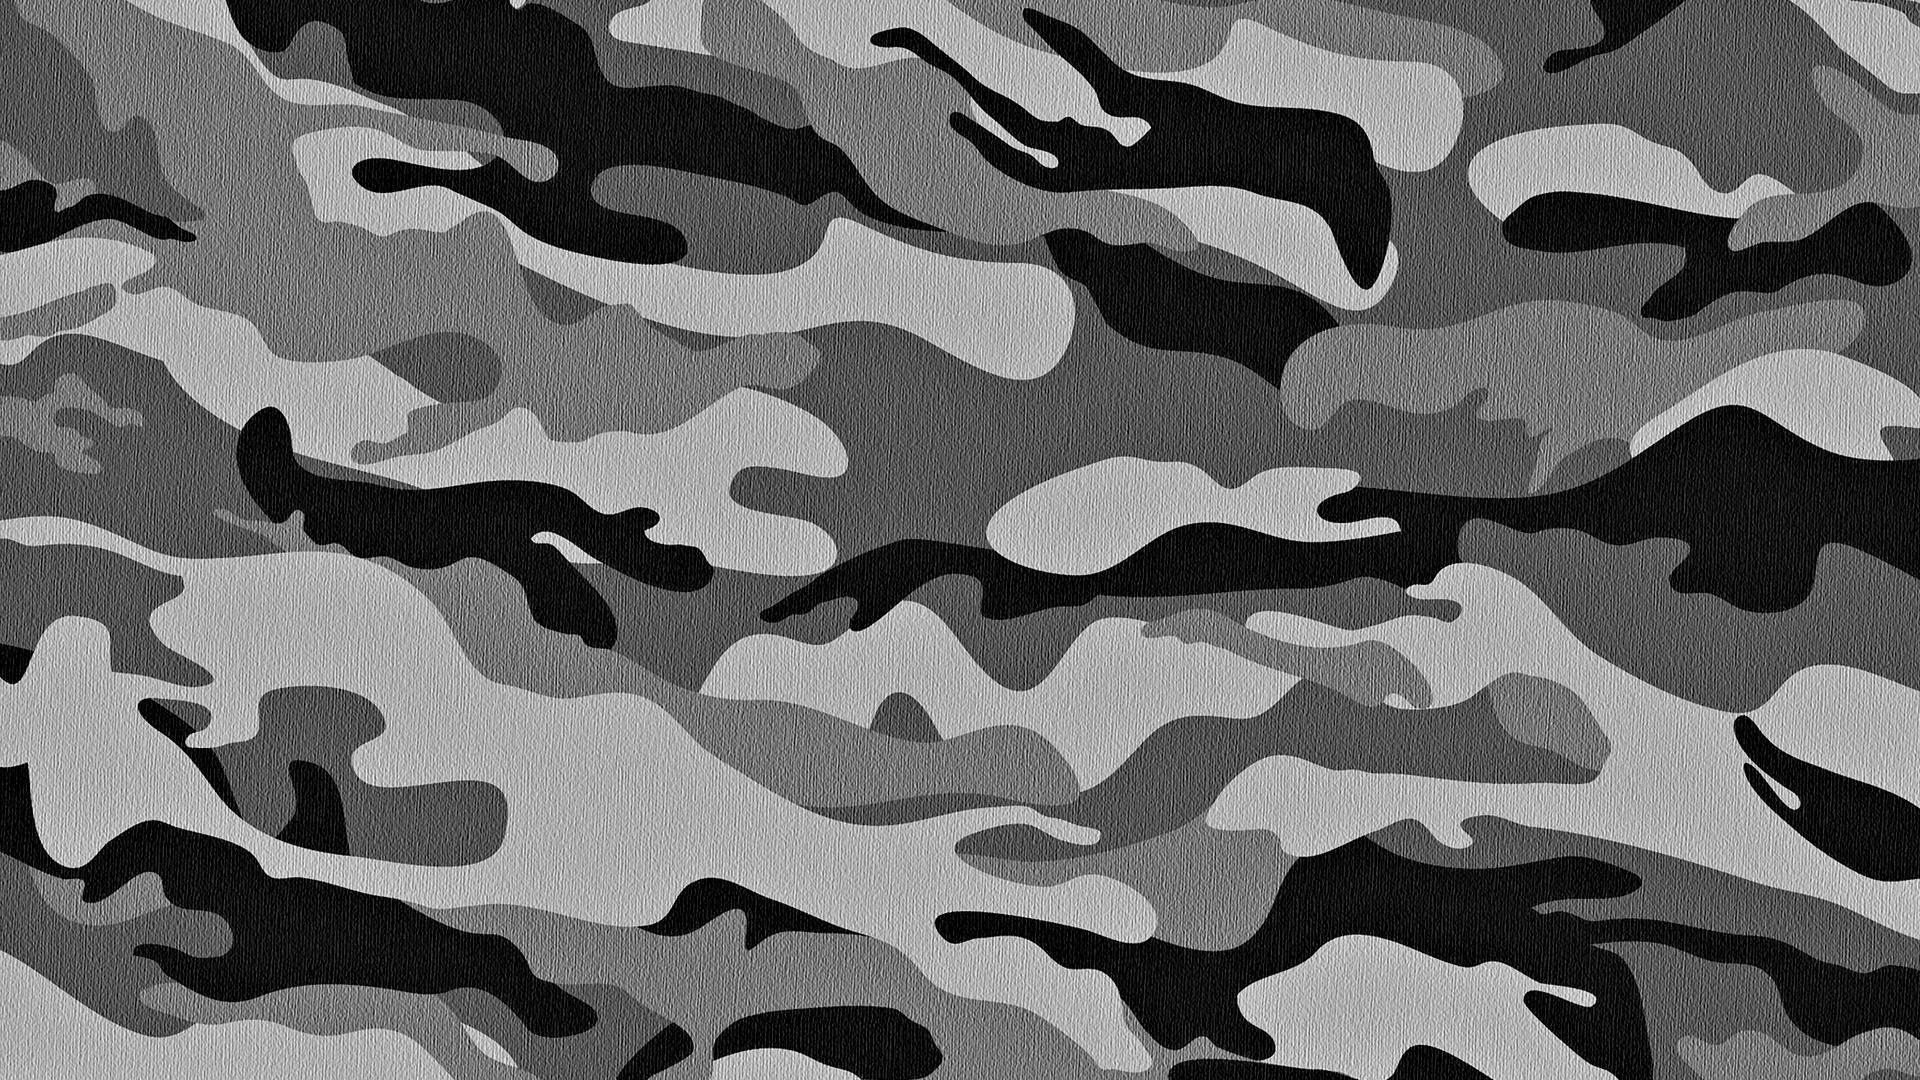 Luxury Black and Grey Camouflage Wallpaper. The Black Posters